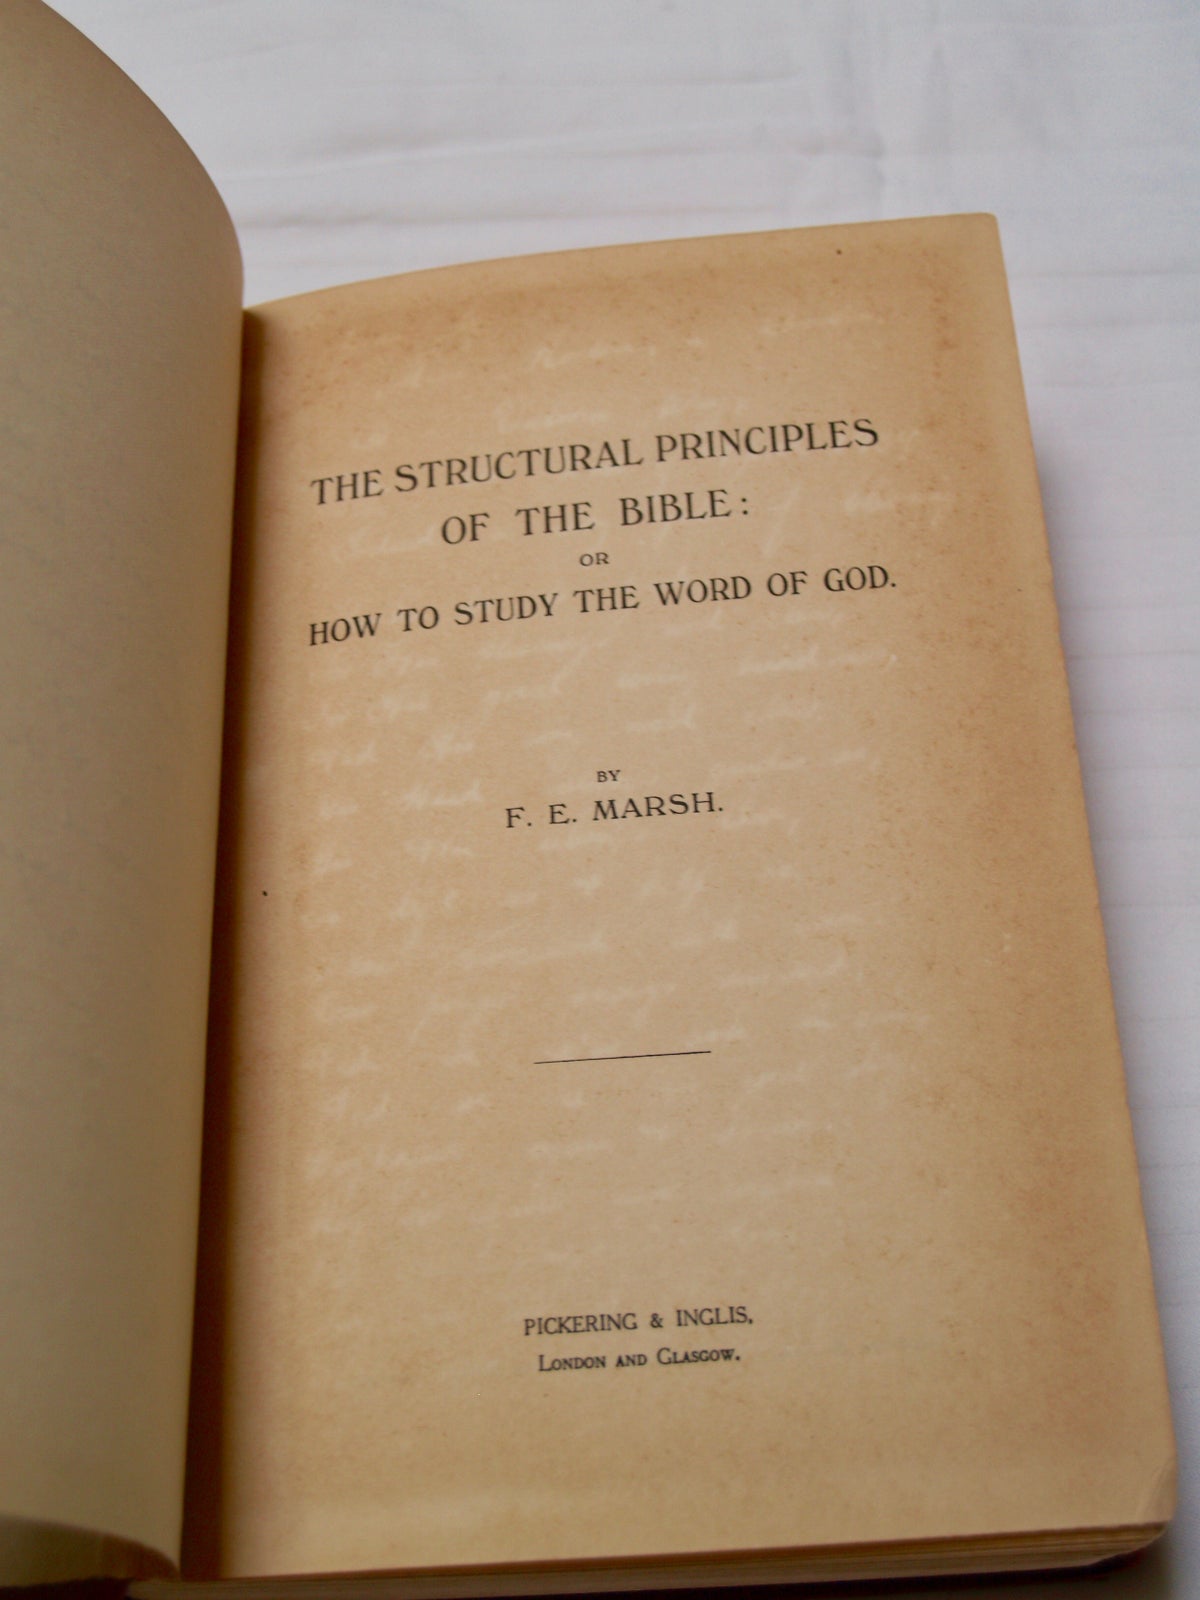 The Structural Principles, of the Bible